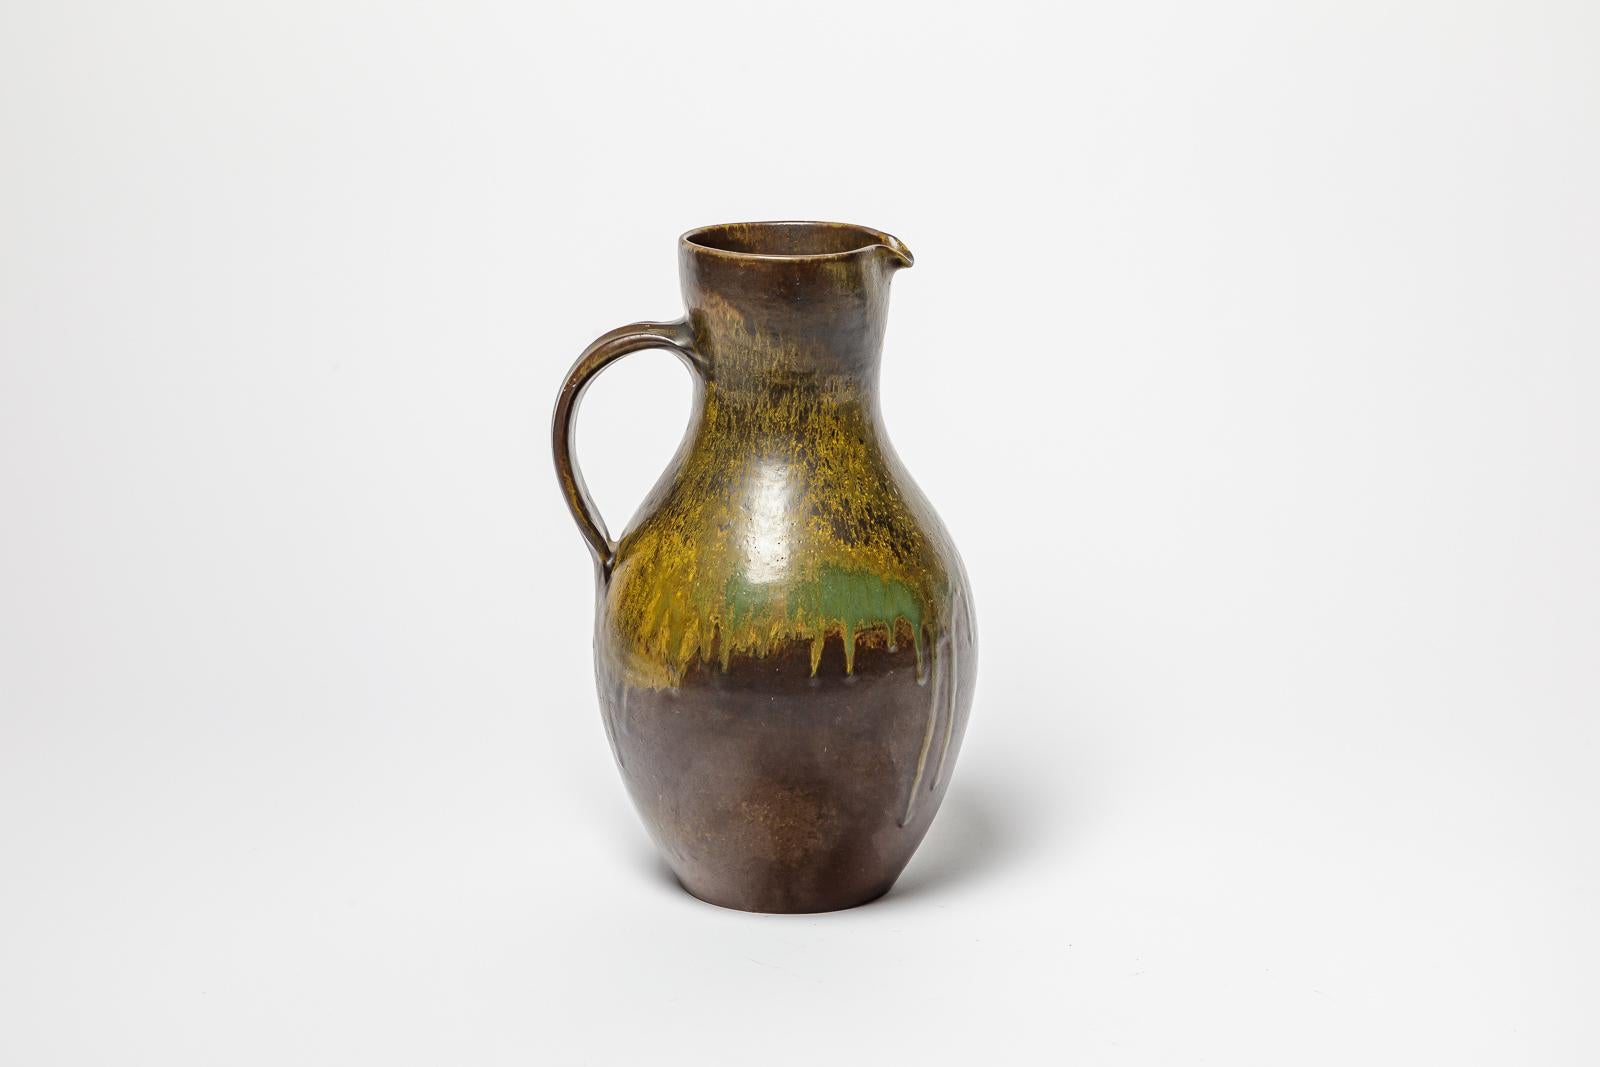 Brown and green glazed ceramic pitcher by Roger Jacques. 
Artist signature under the base. Circa 1960-1970.
H : 11.02’ x 5.9’ x 5.9’ inches.